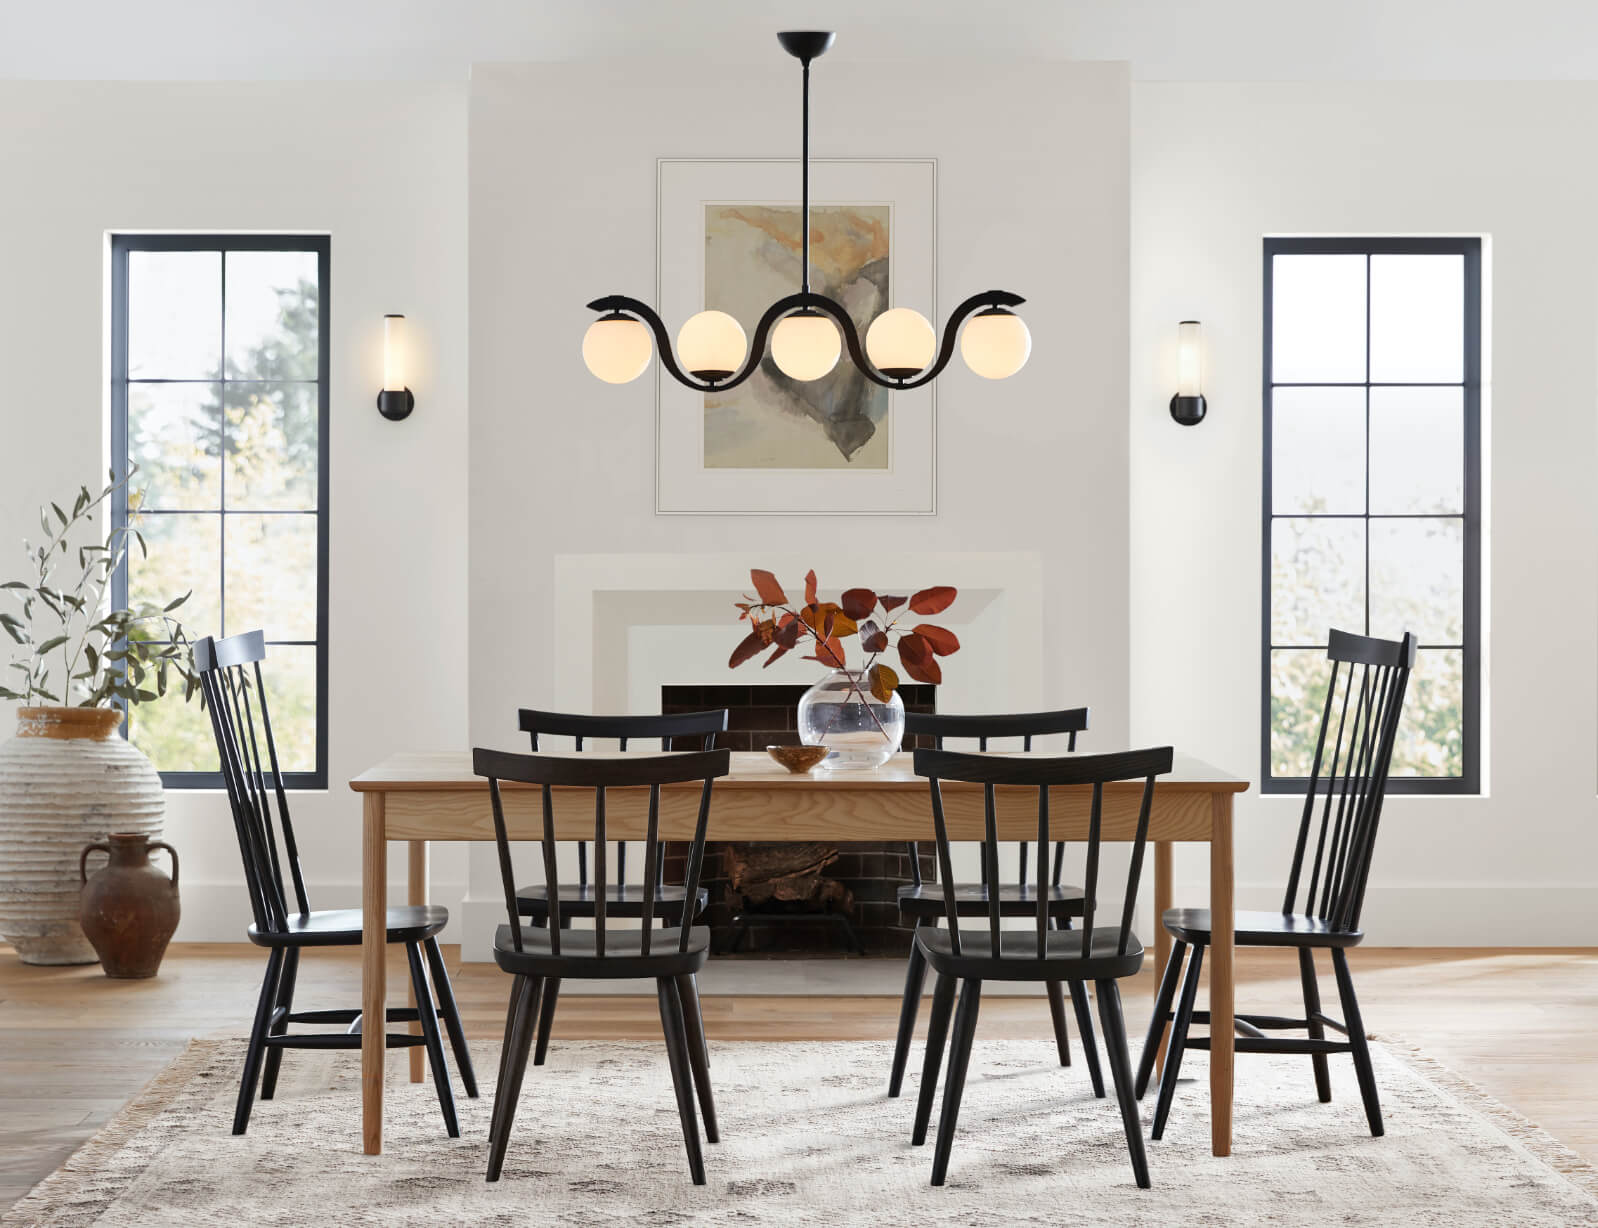 How To Choose Dining Room Lighting, What Size Round Chandelier For Rectangular Table